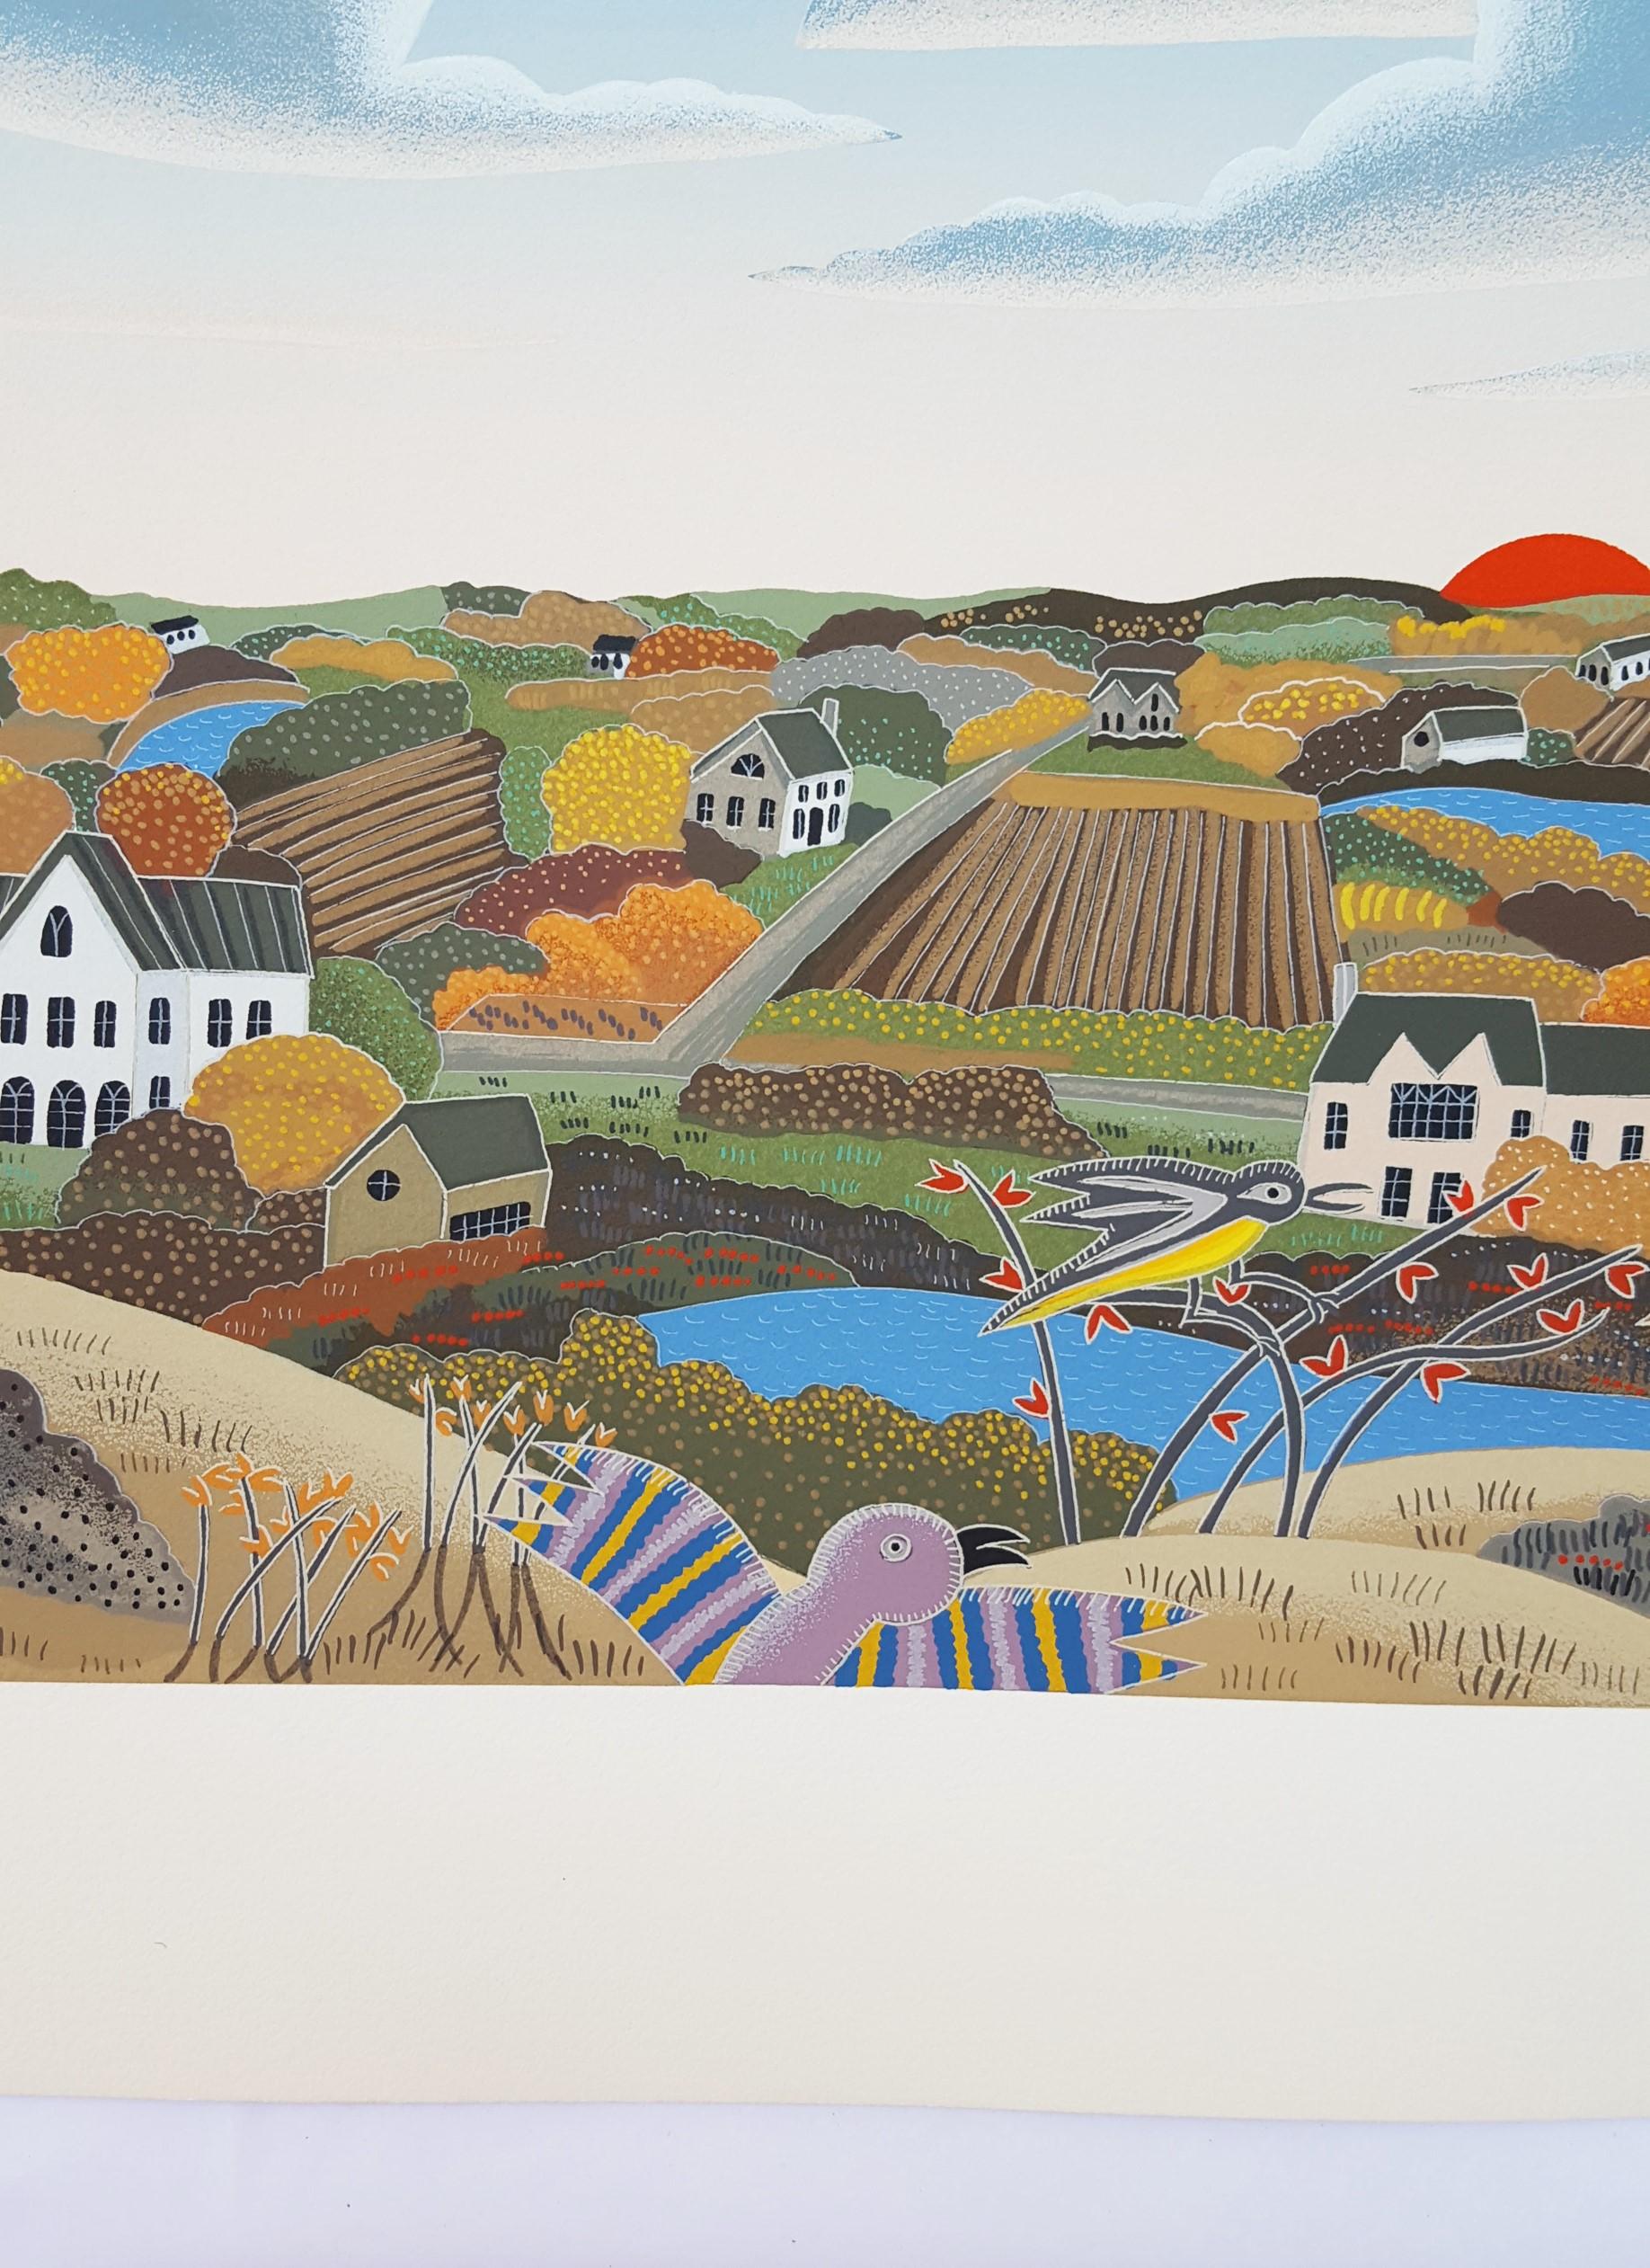 An original signed screenprint on soft white Somerset paper by American artist Thomas McKnight (1941-) titled 